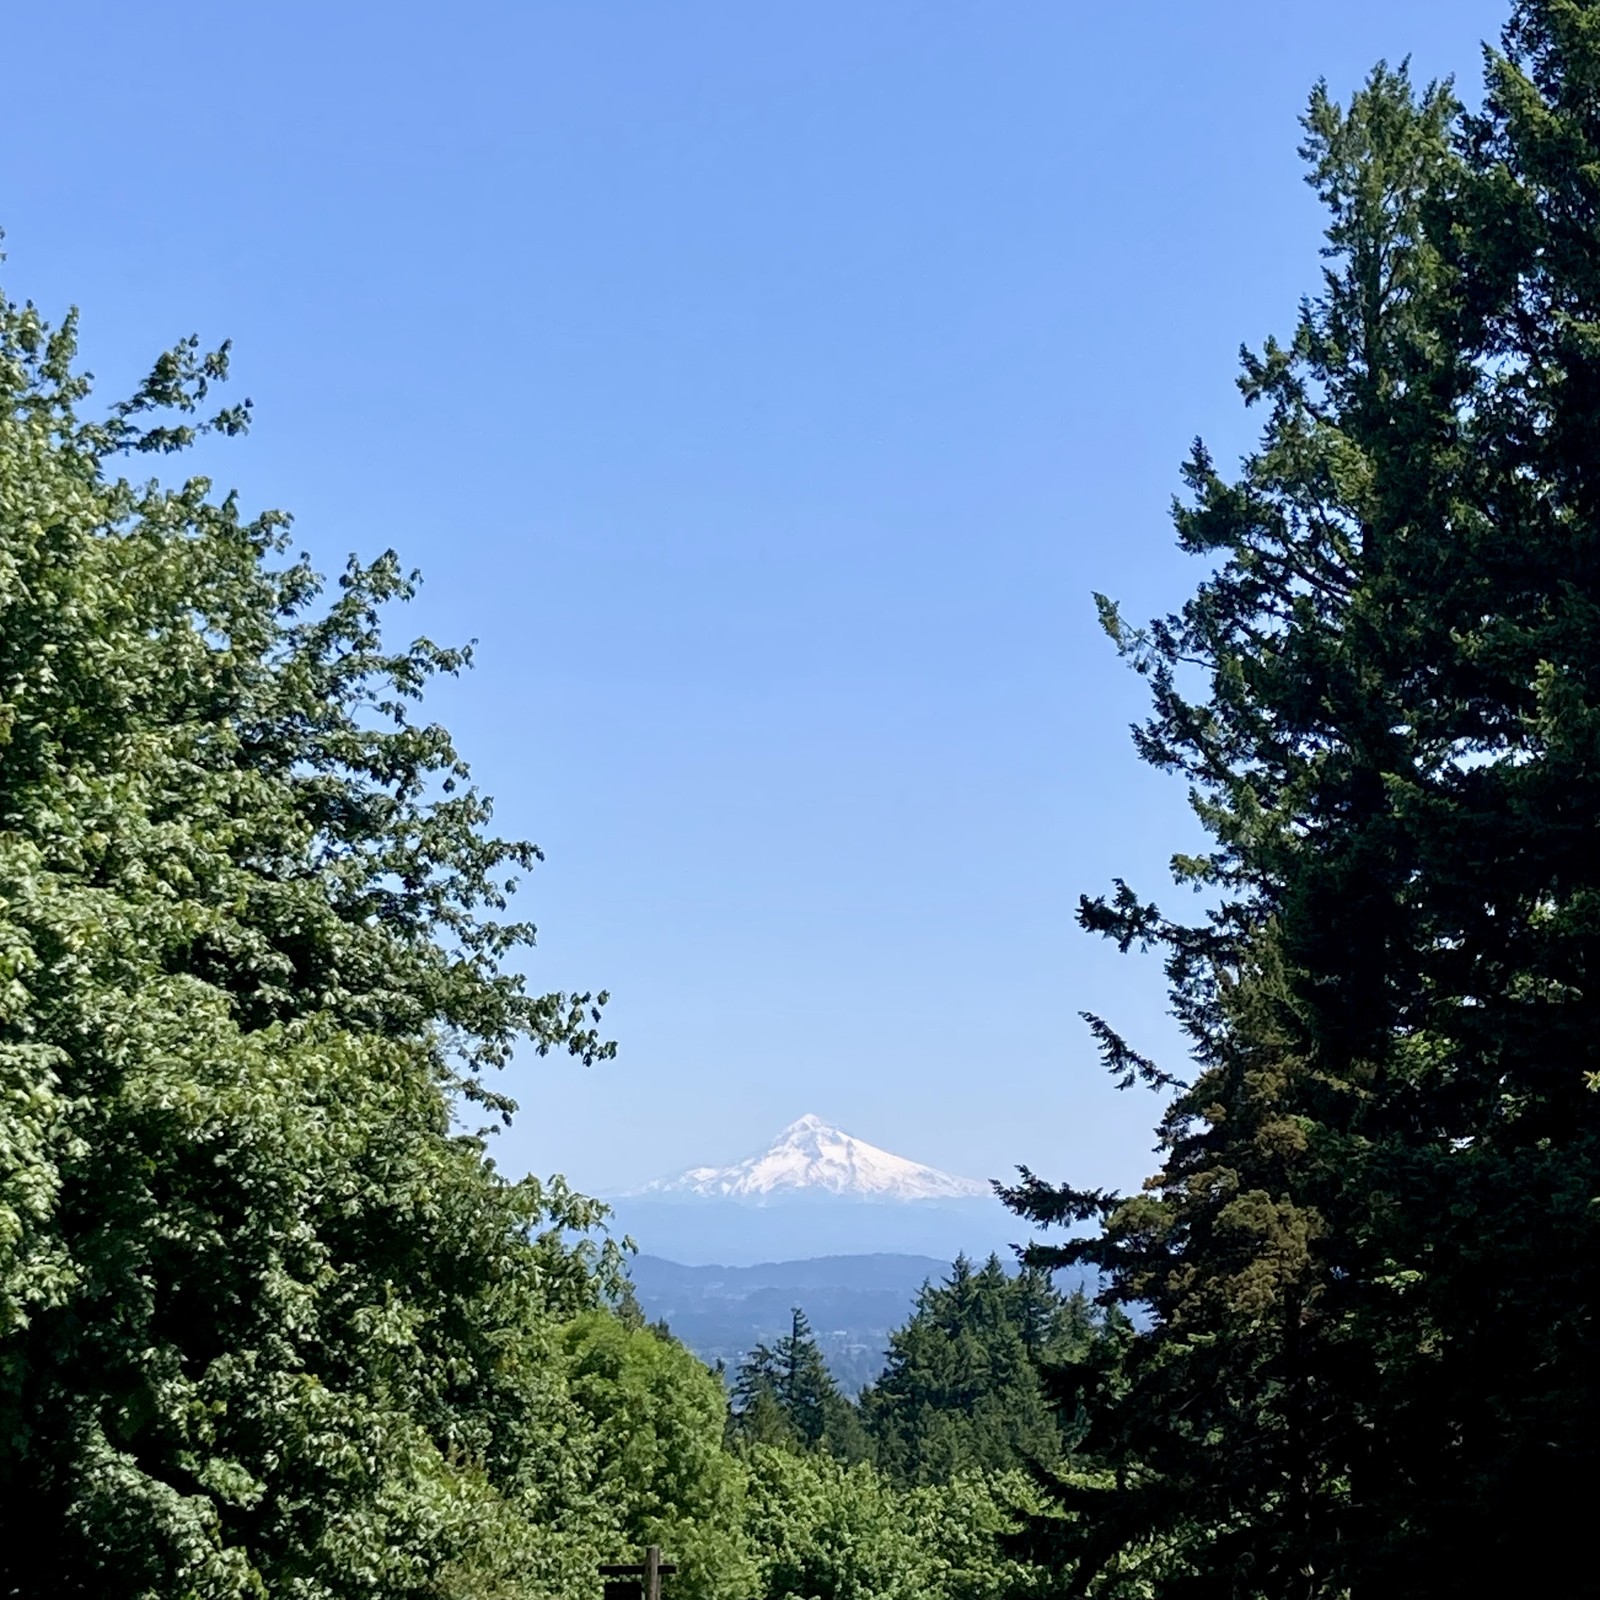 Mt Hood, snow-capped, brilliant under a flawless sky, in crystalline air